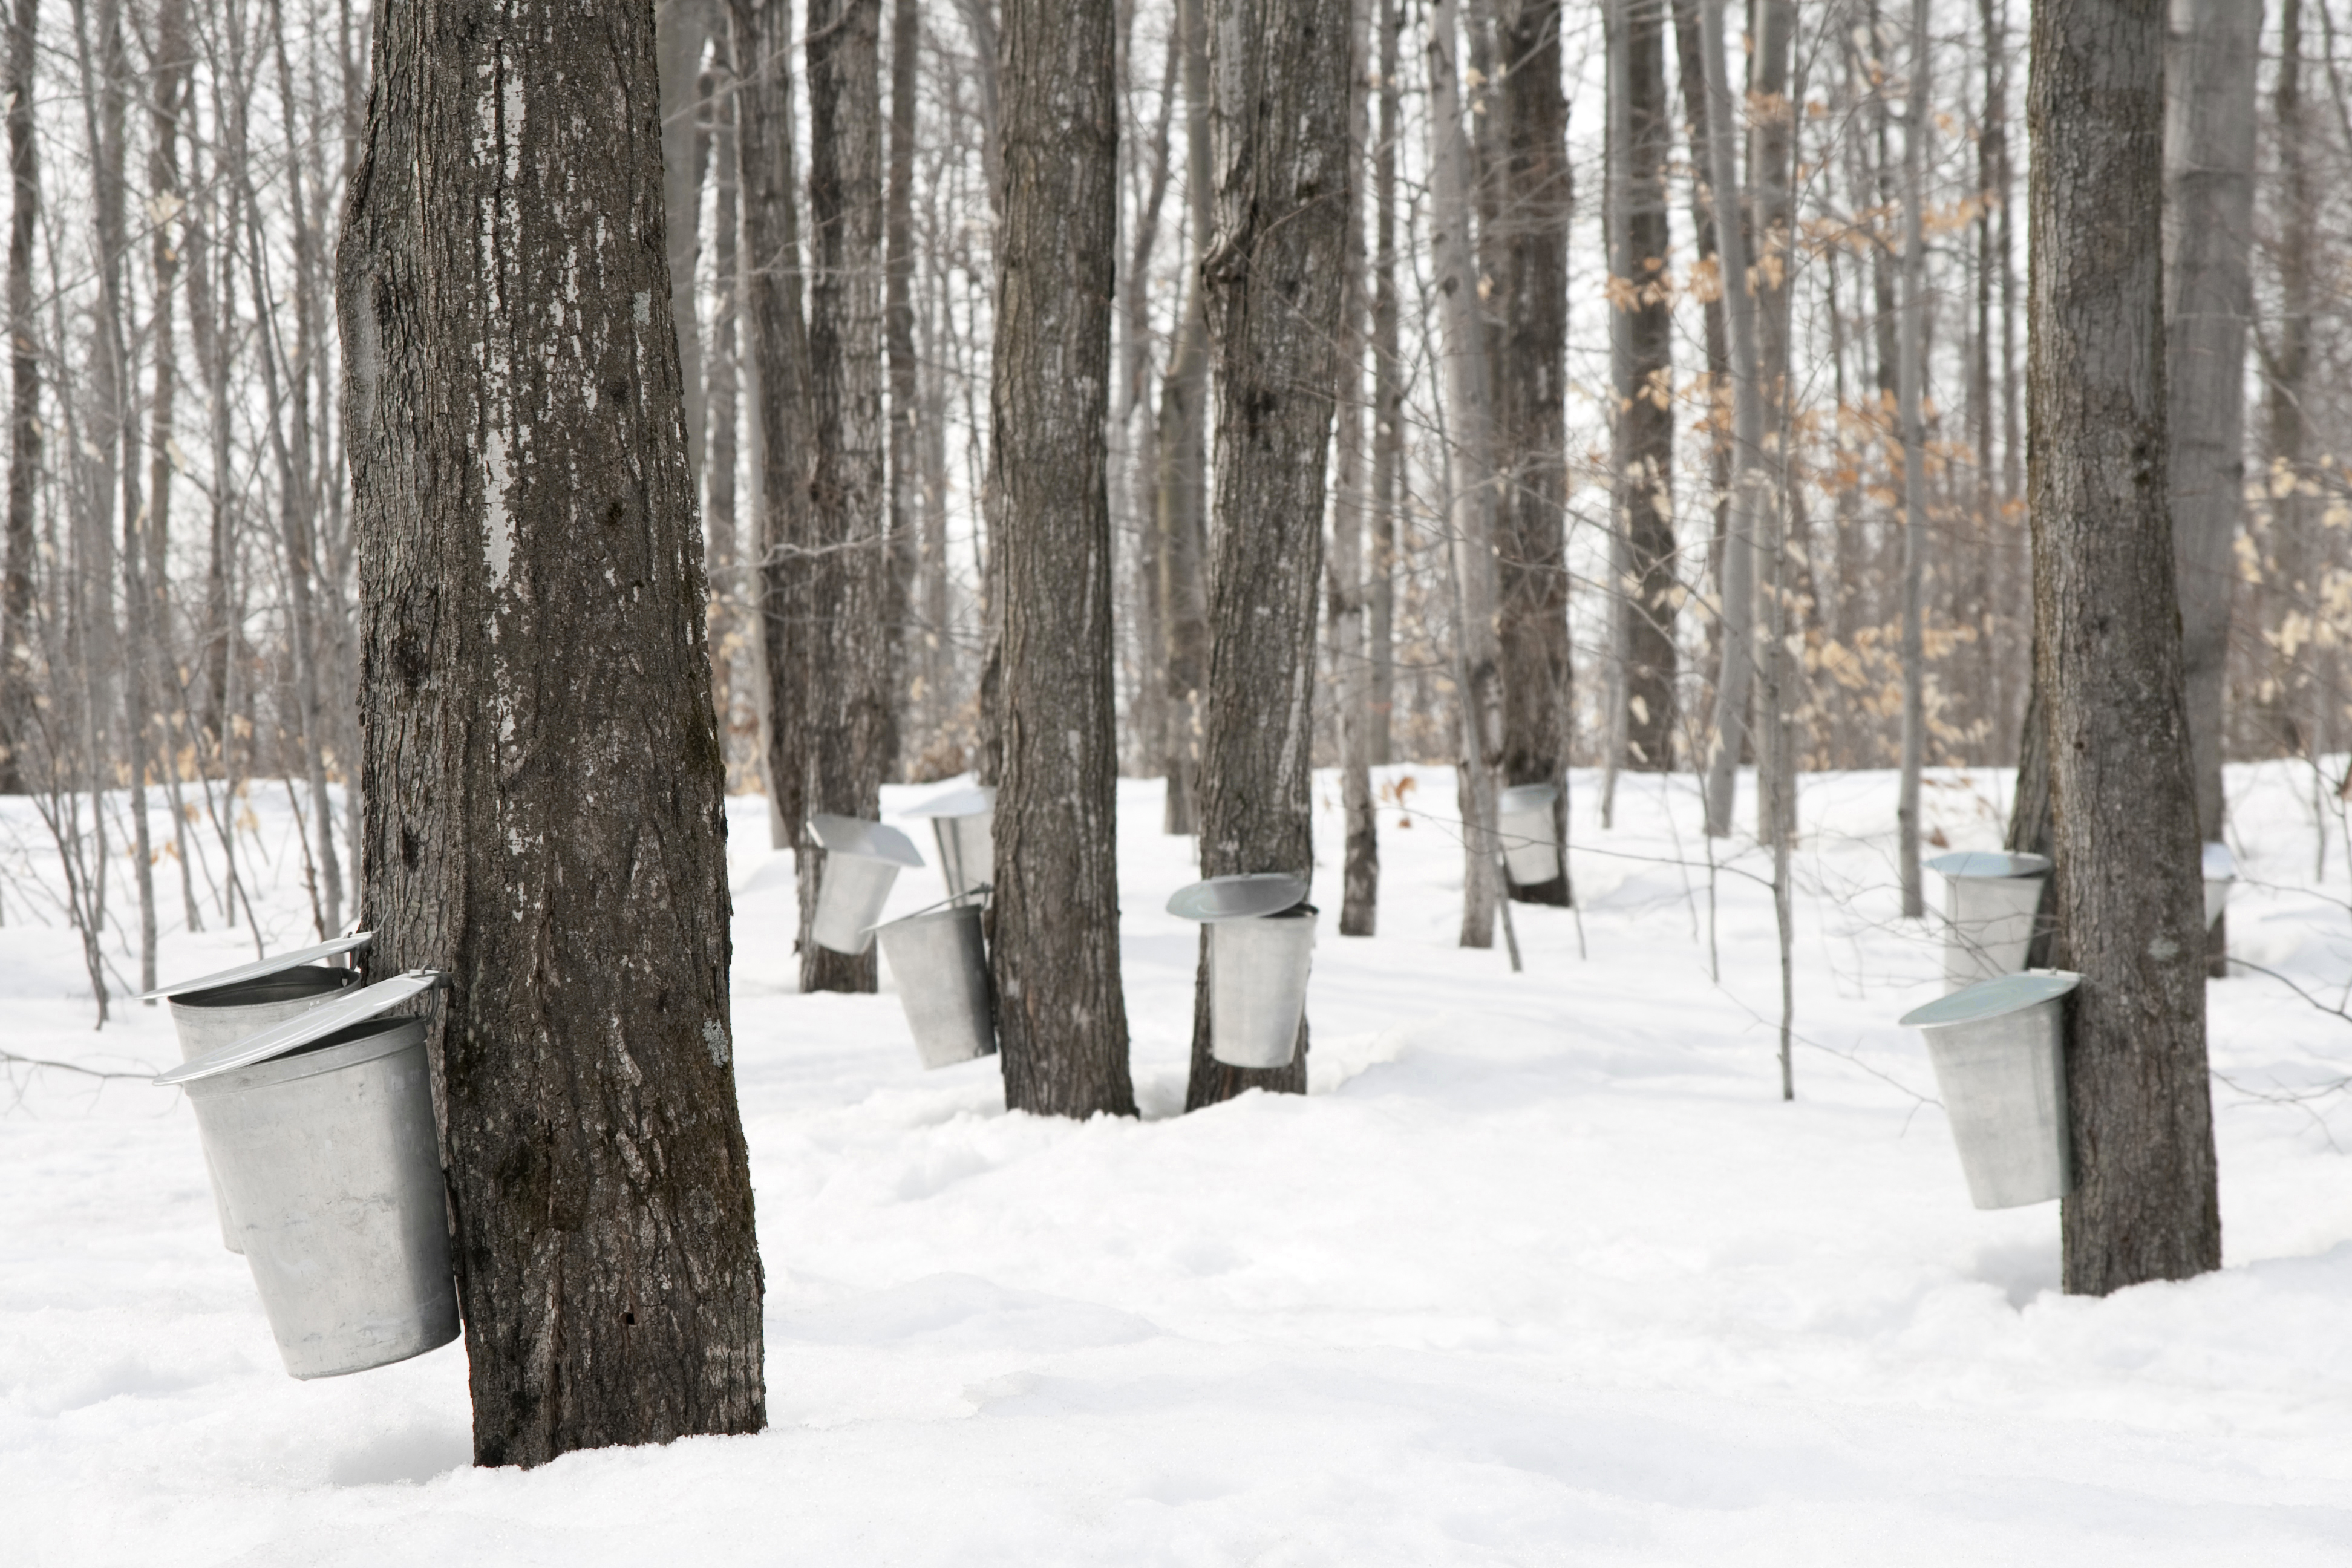 Maple Syrup Producers Take Advantage of Weather